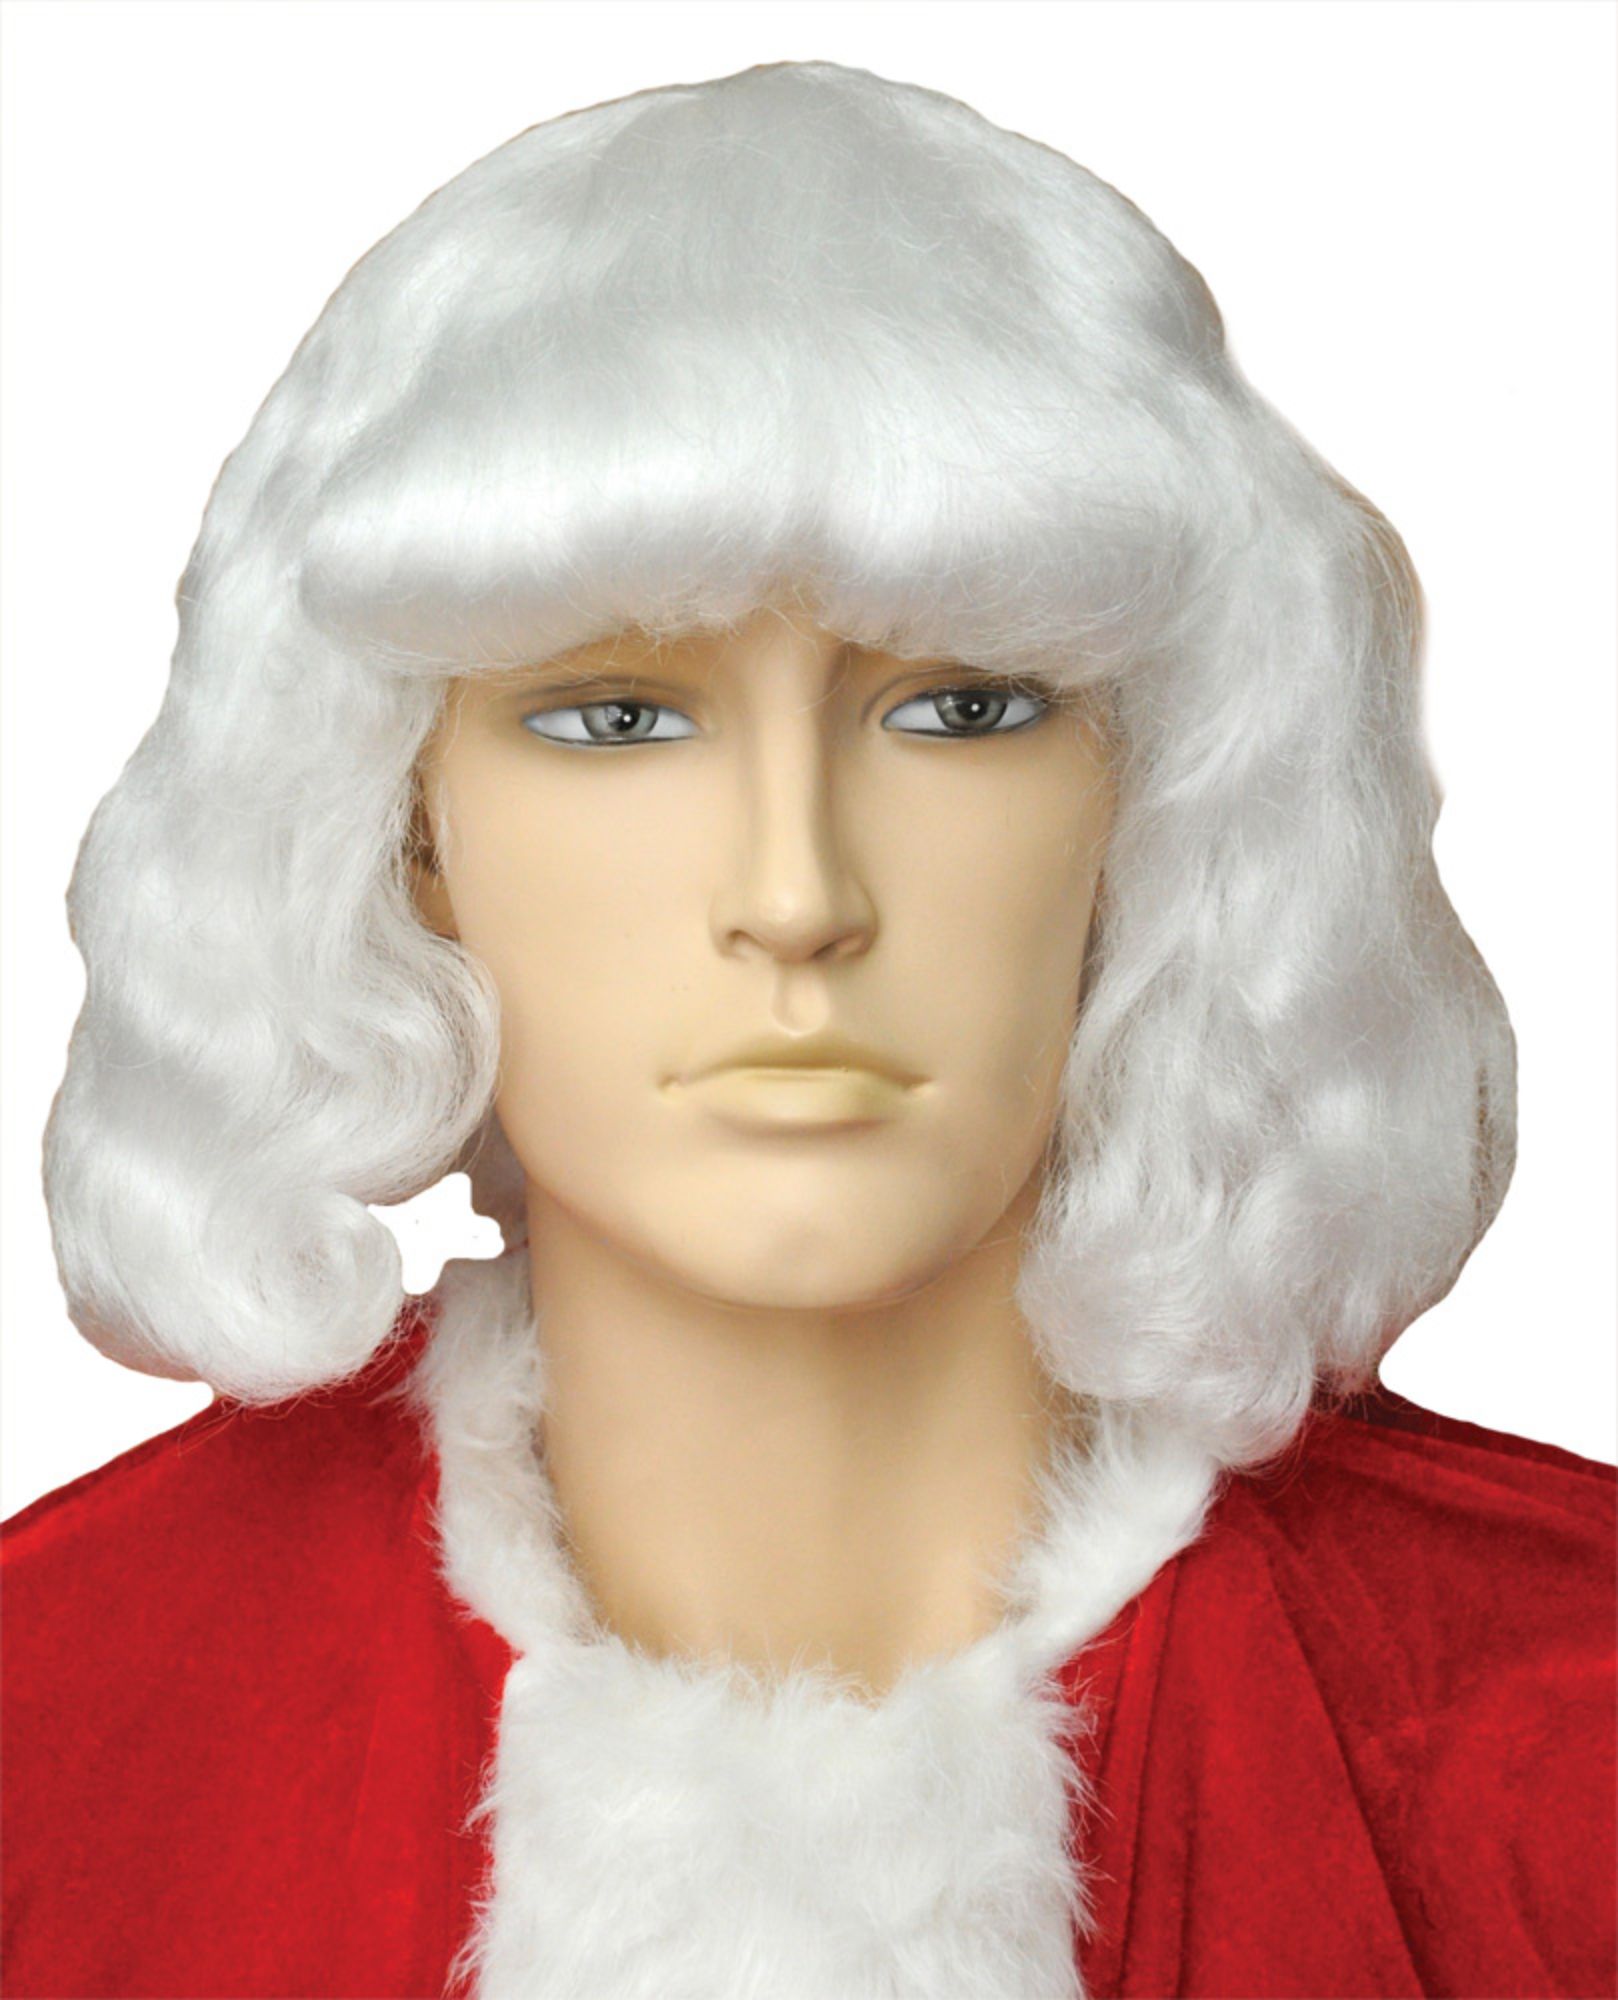 The Costume Center White Santa Women Adult Halloween Wig Costume Accessory - One Size